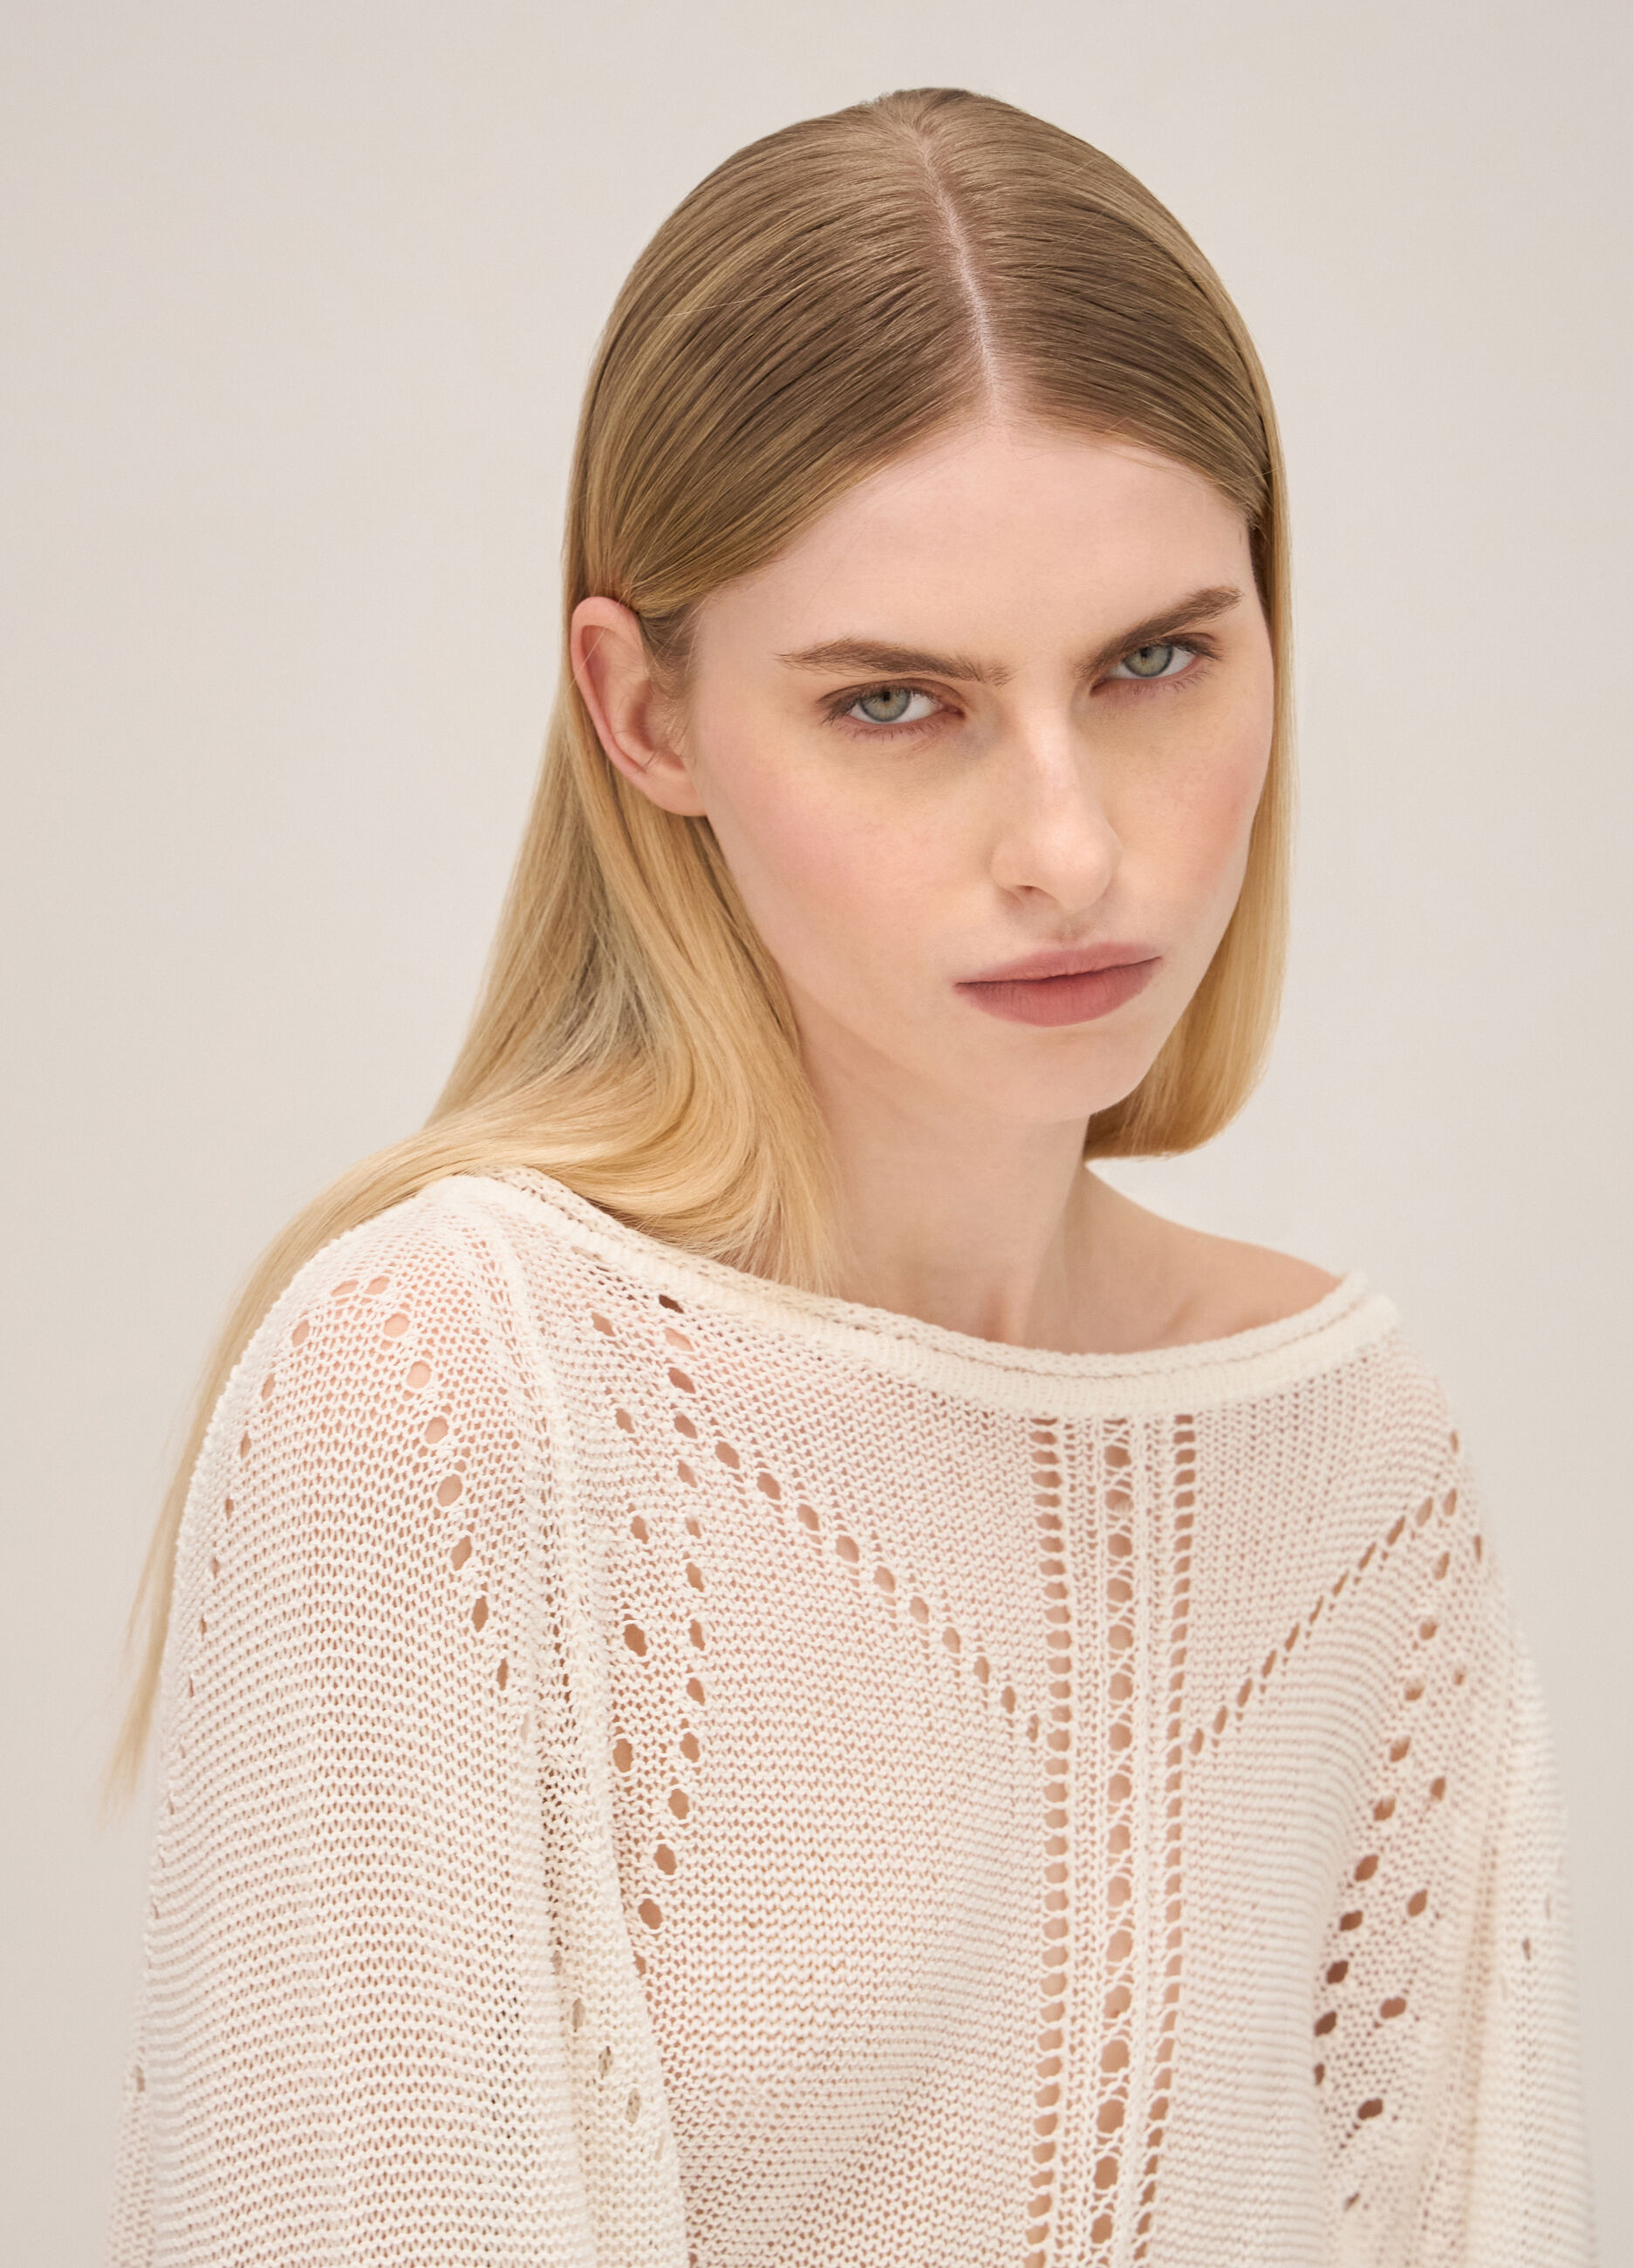 Openwork knitted top